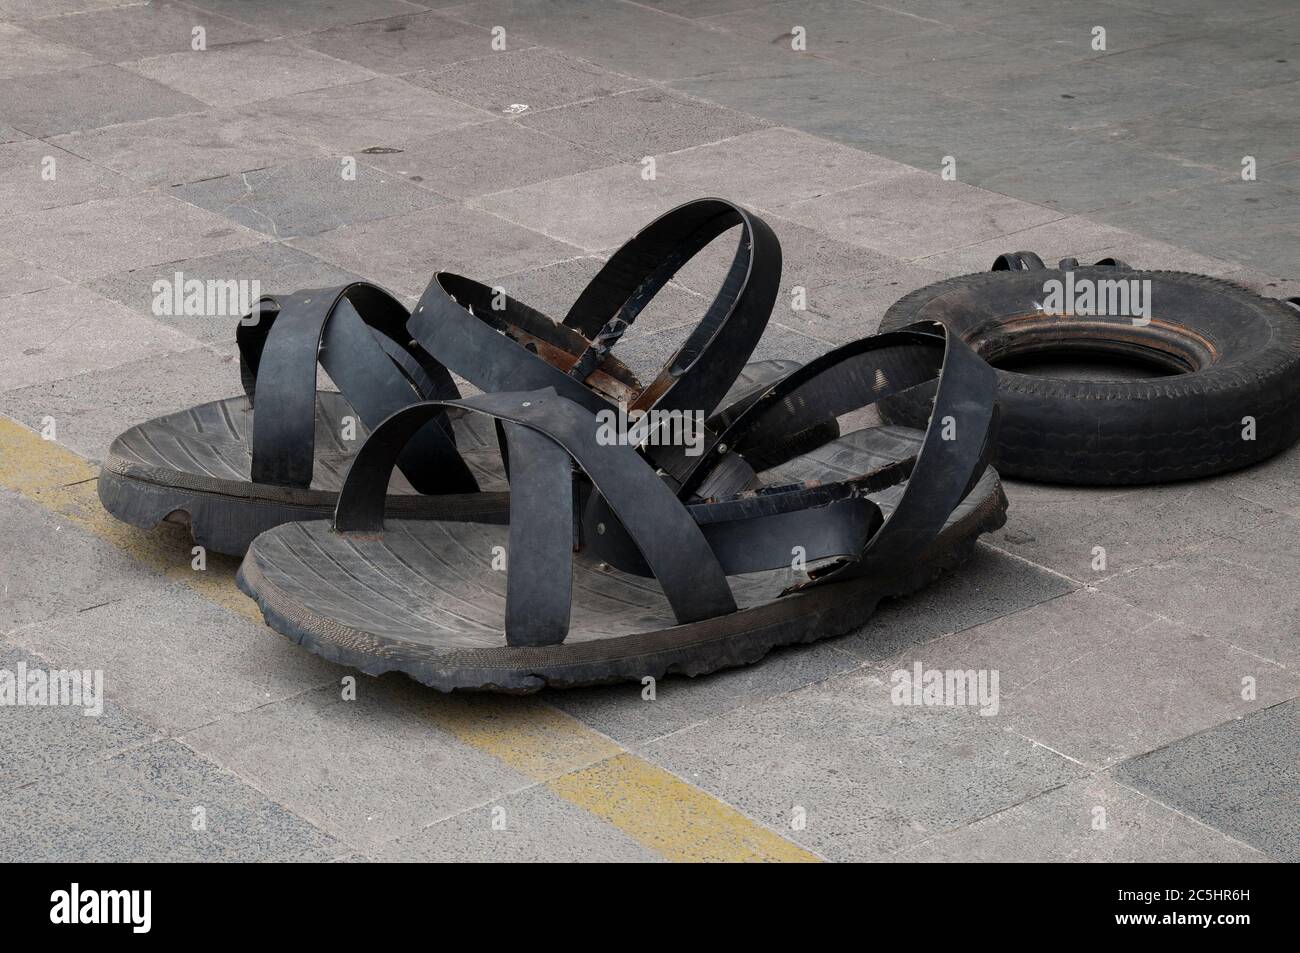 Tire Sandals High Resolution Stock Photography and Images - Alamy